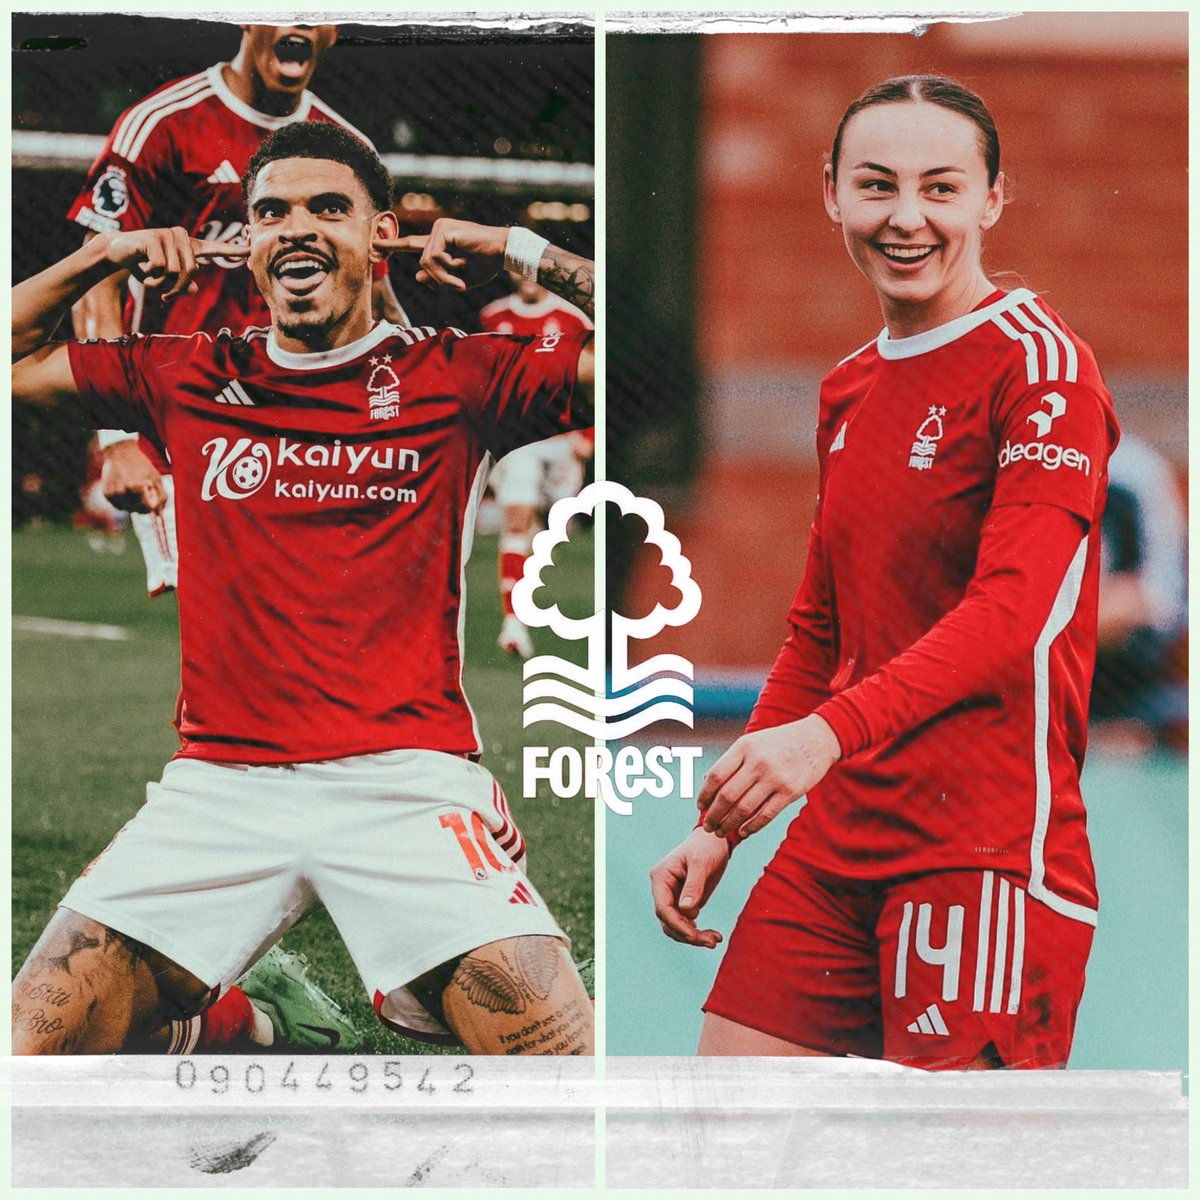 Matchday in the Garibaldi for both @NFFC and @NFFCWomen today. COME ON YOU REDS! 👊🏻🌳🔴 (see you at Spurs 👌🏻) #NFFC